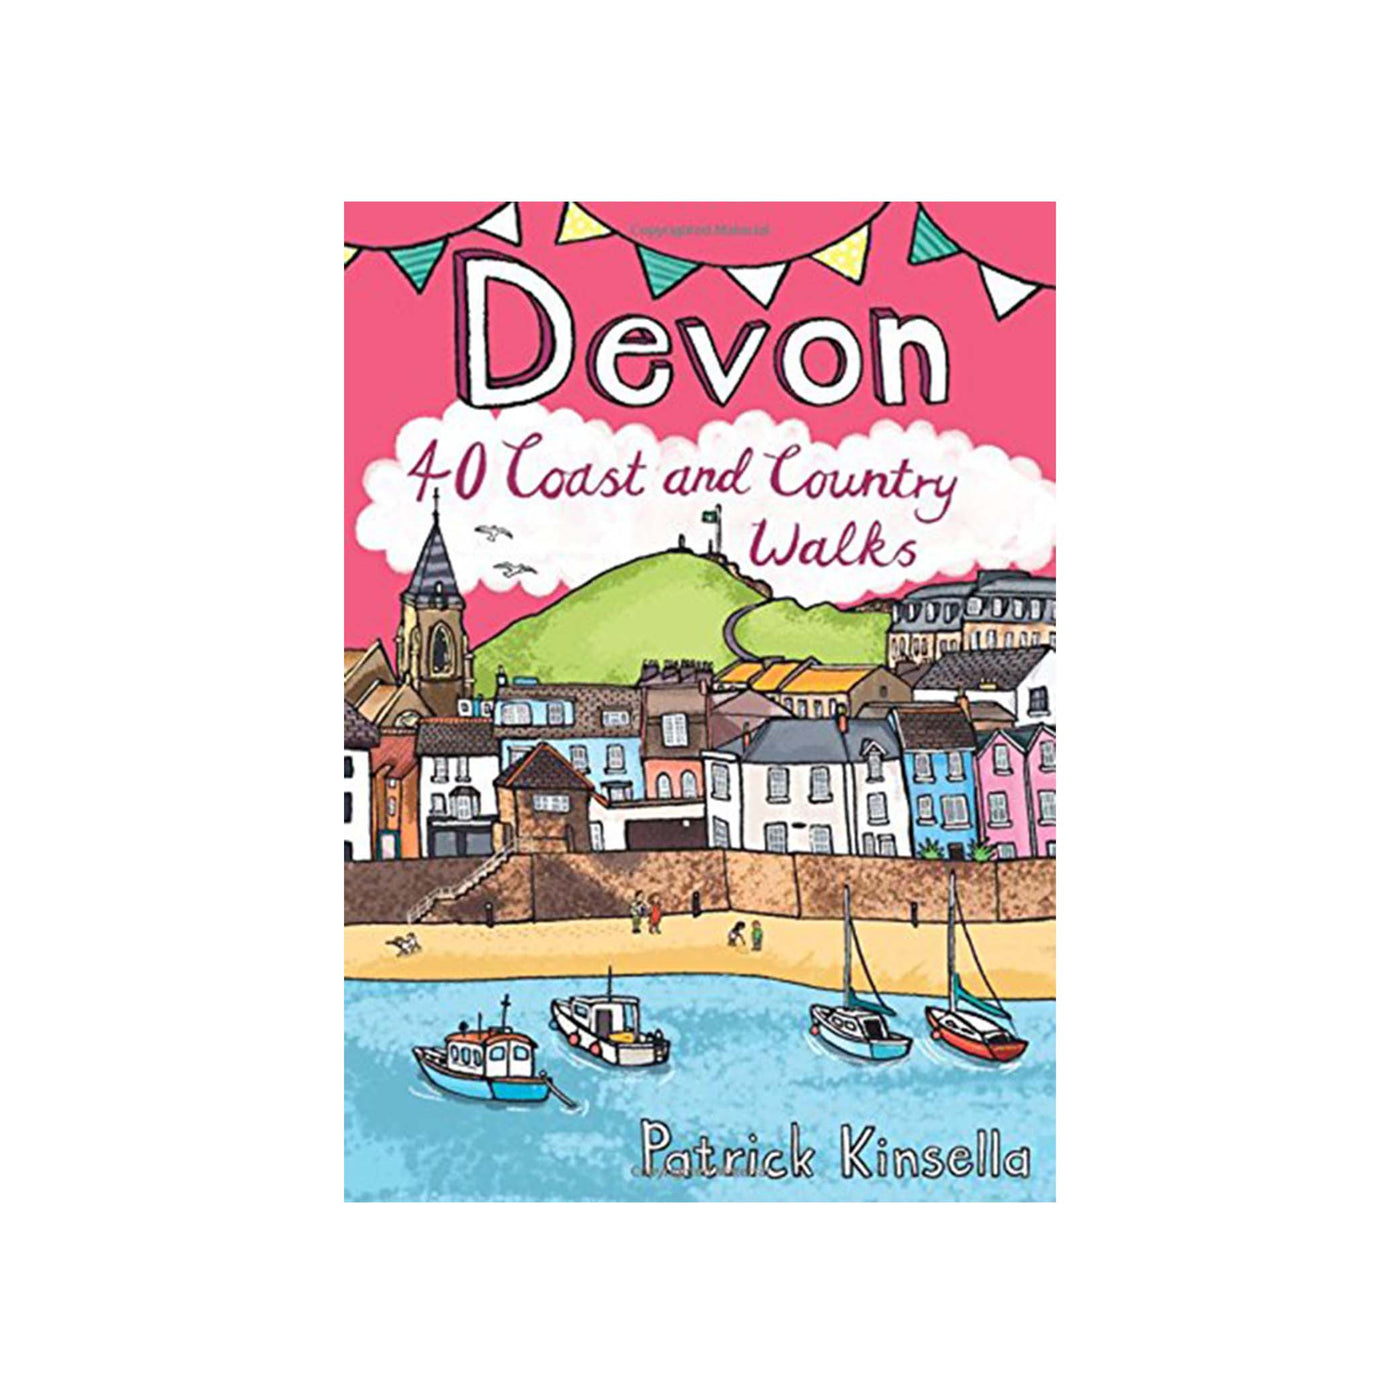 Devon: 40 coast and country walks by Patrick Kinsella. Pocket Mountains guidebook. 